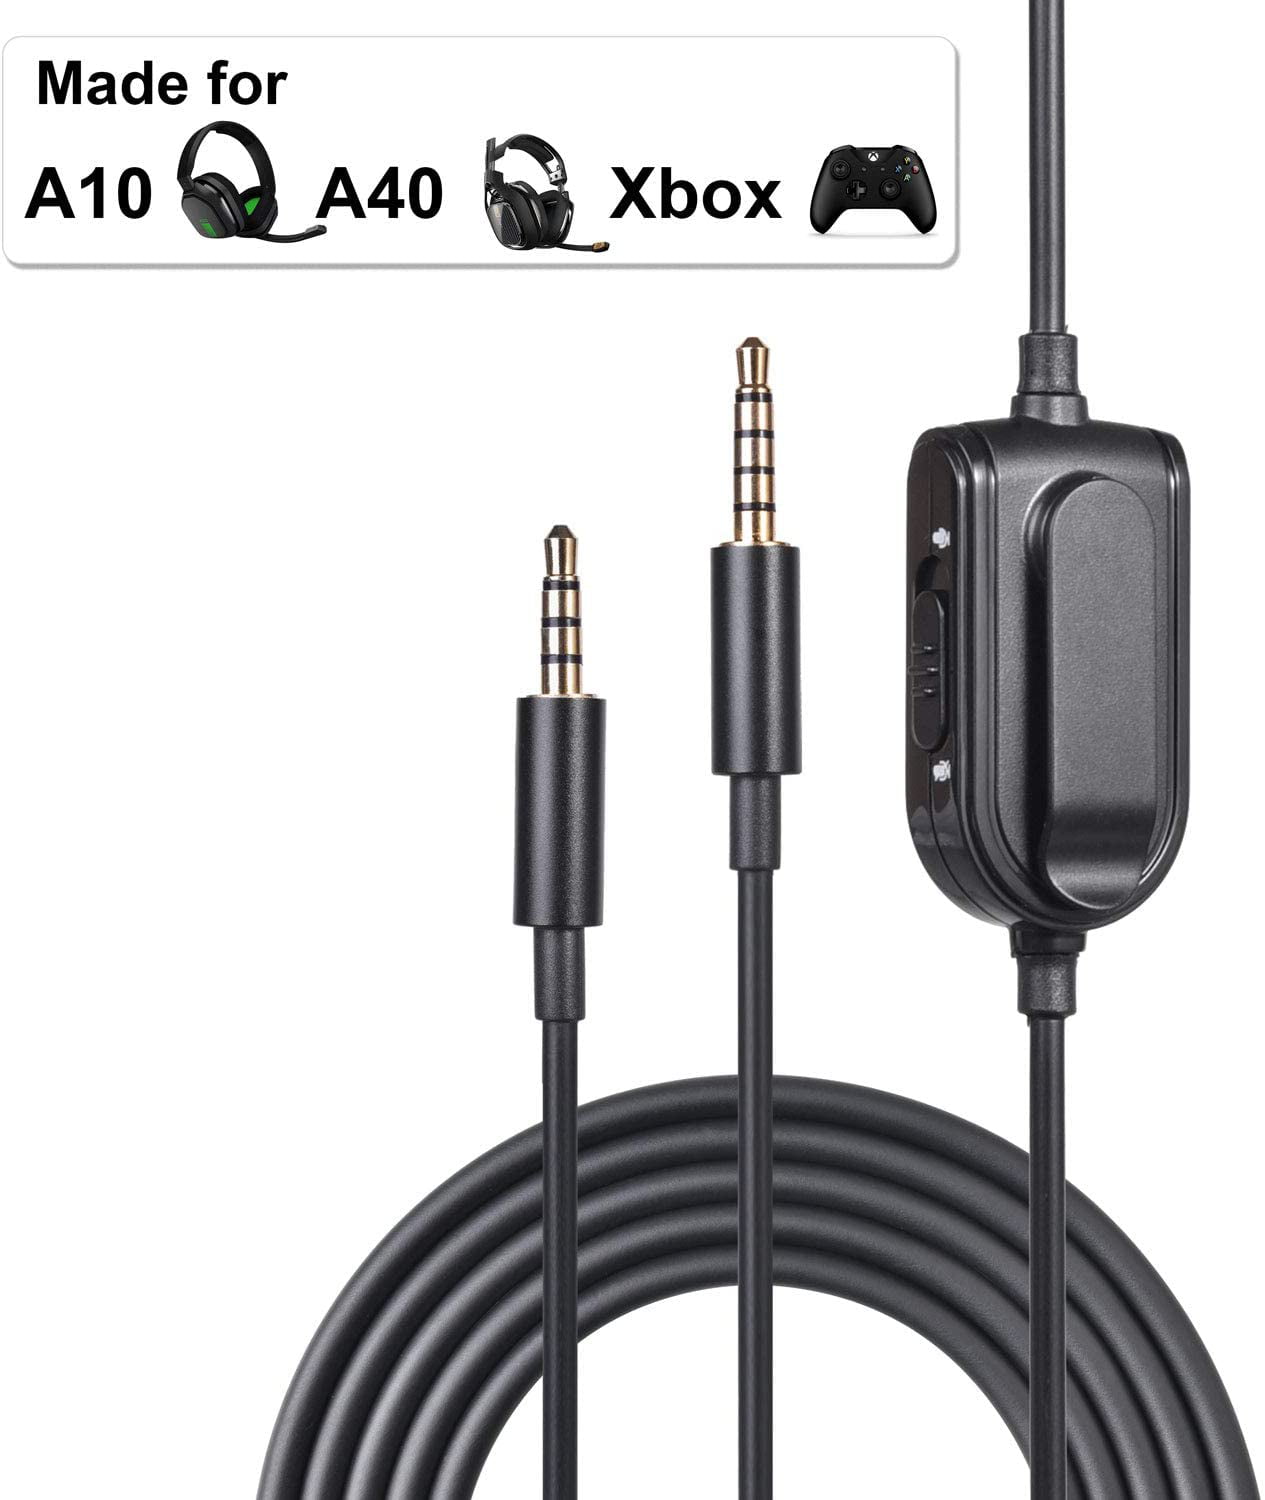 A10 A40 Replacement Cord VILUME Ps4 Controller Astro a40 Wire 6.5 Feet Black A10 Headset Cable 2.0M Astro A40TR Inline Mute Cable Cord for Astro A10/A40 Gaming Headsets/Xbox One 